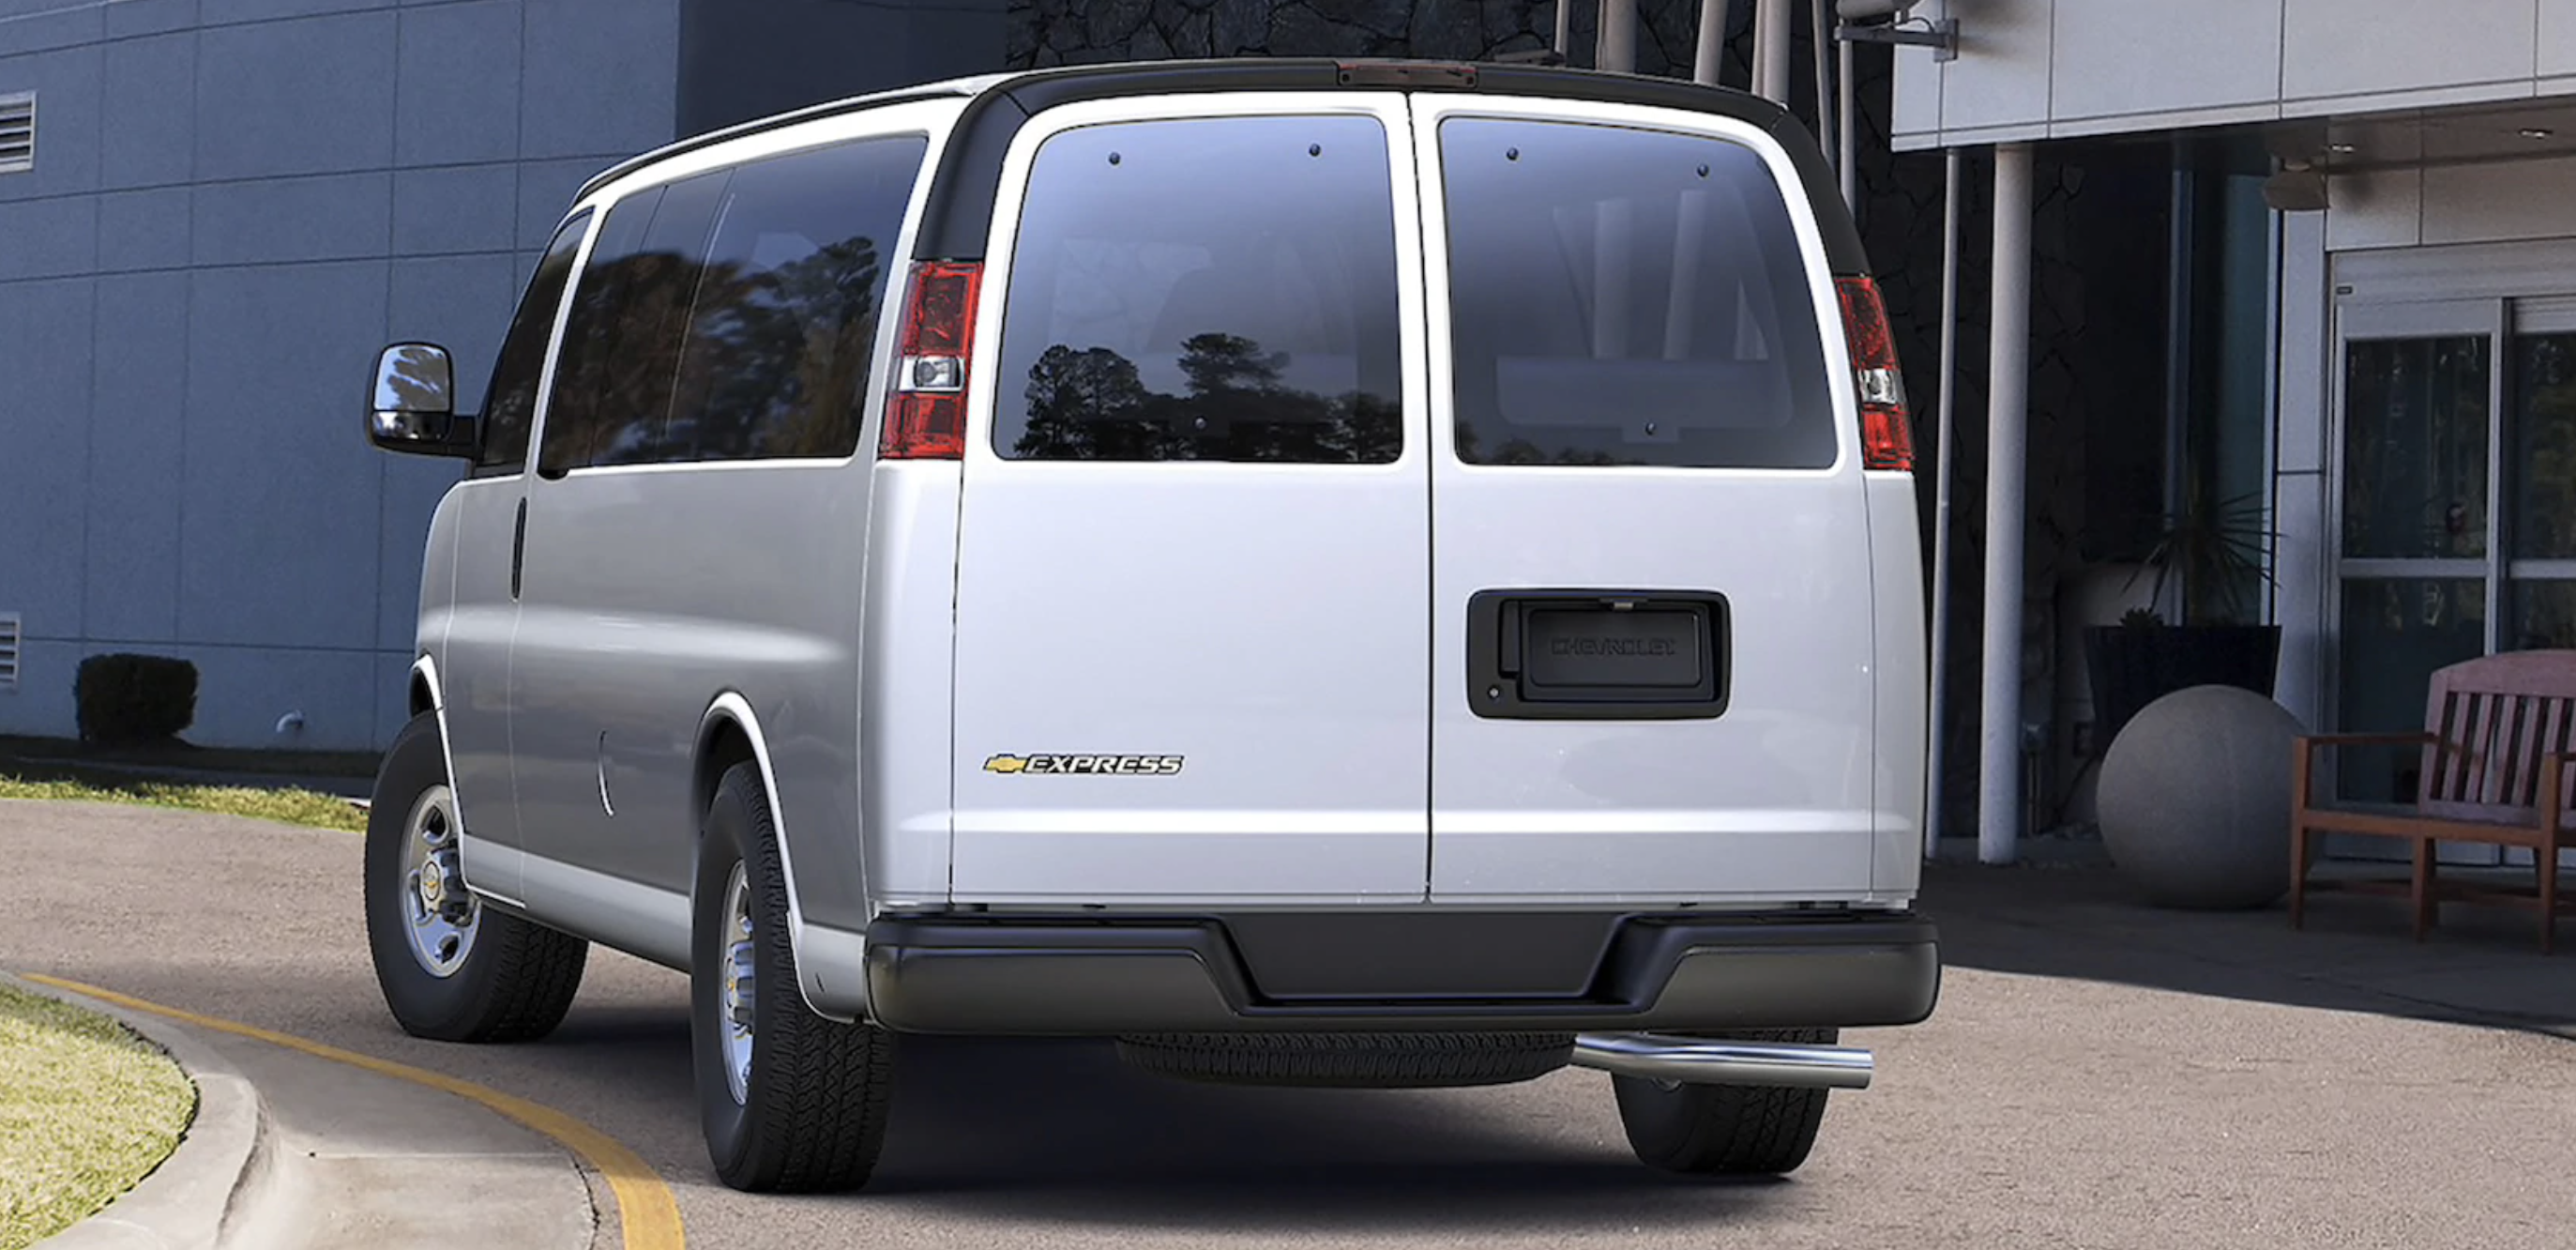 2021 Chevrolet Express Review, Pricing, and Specs